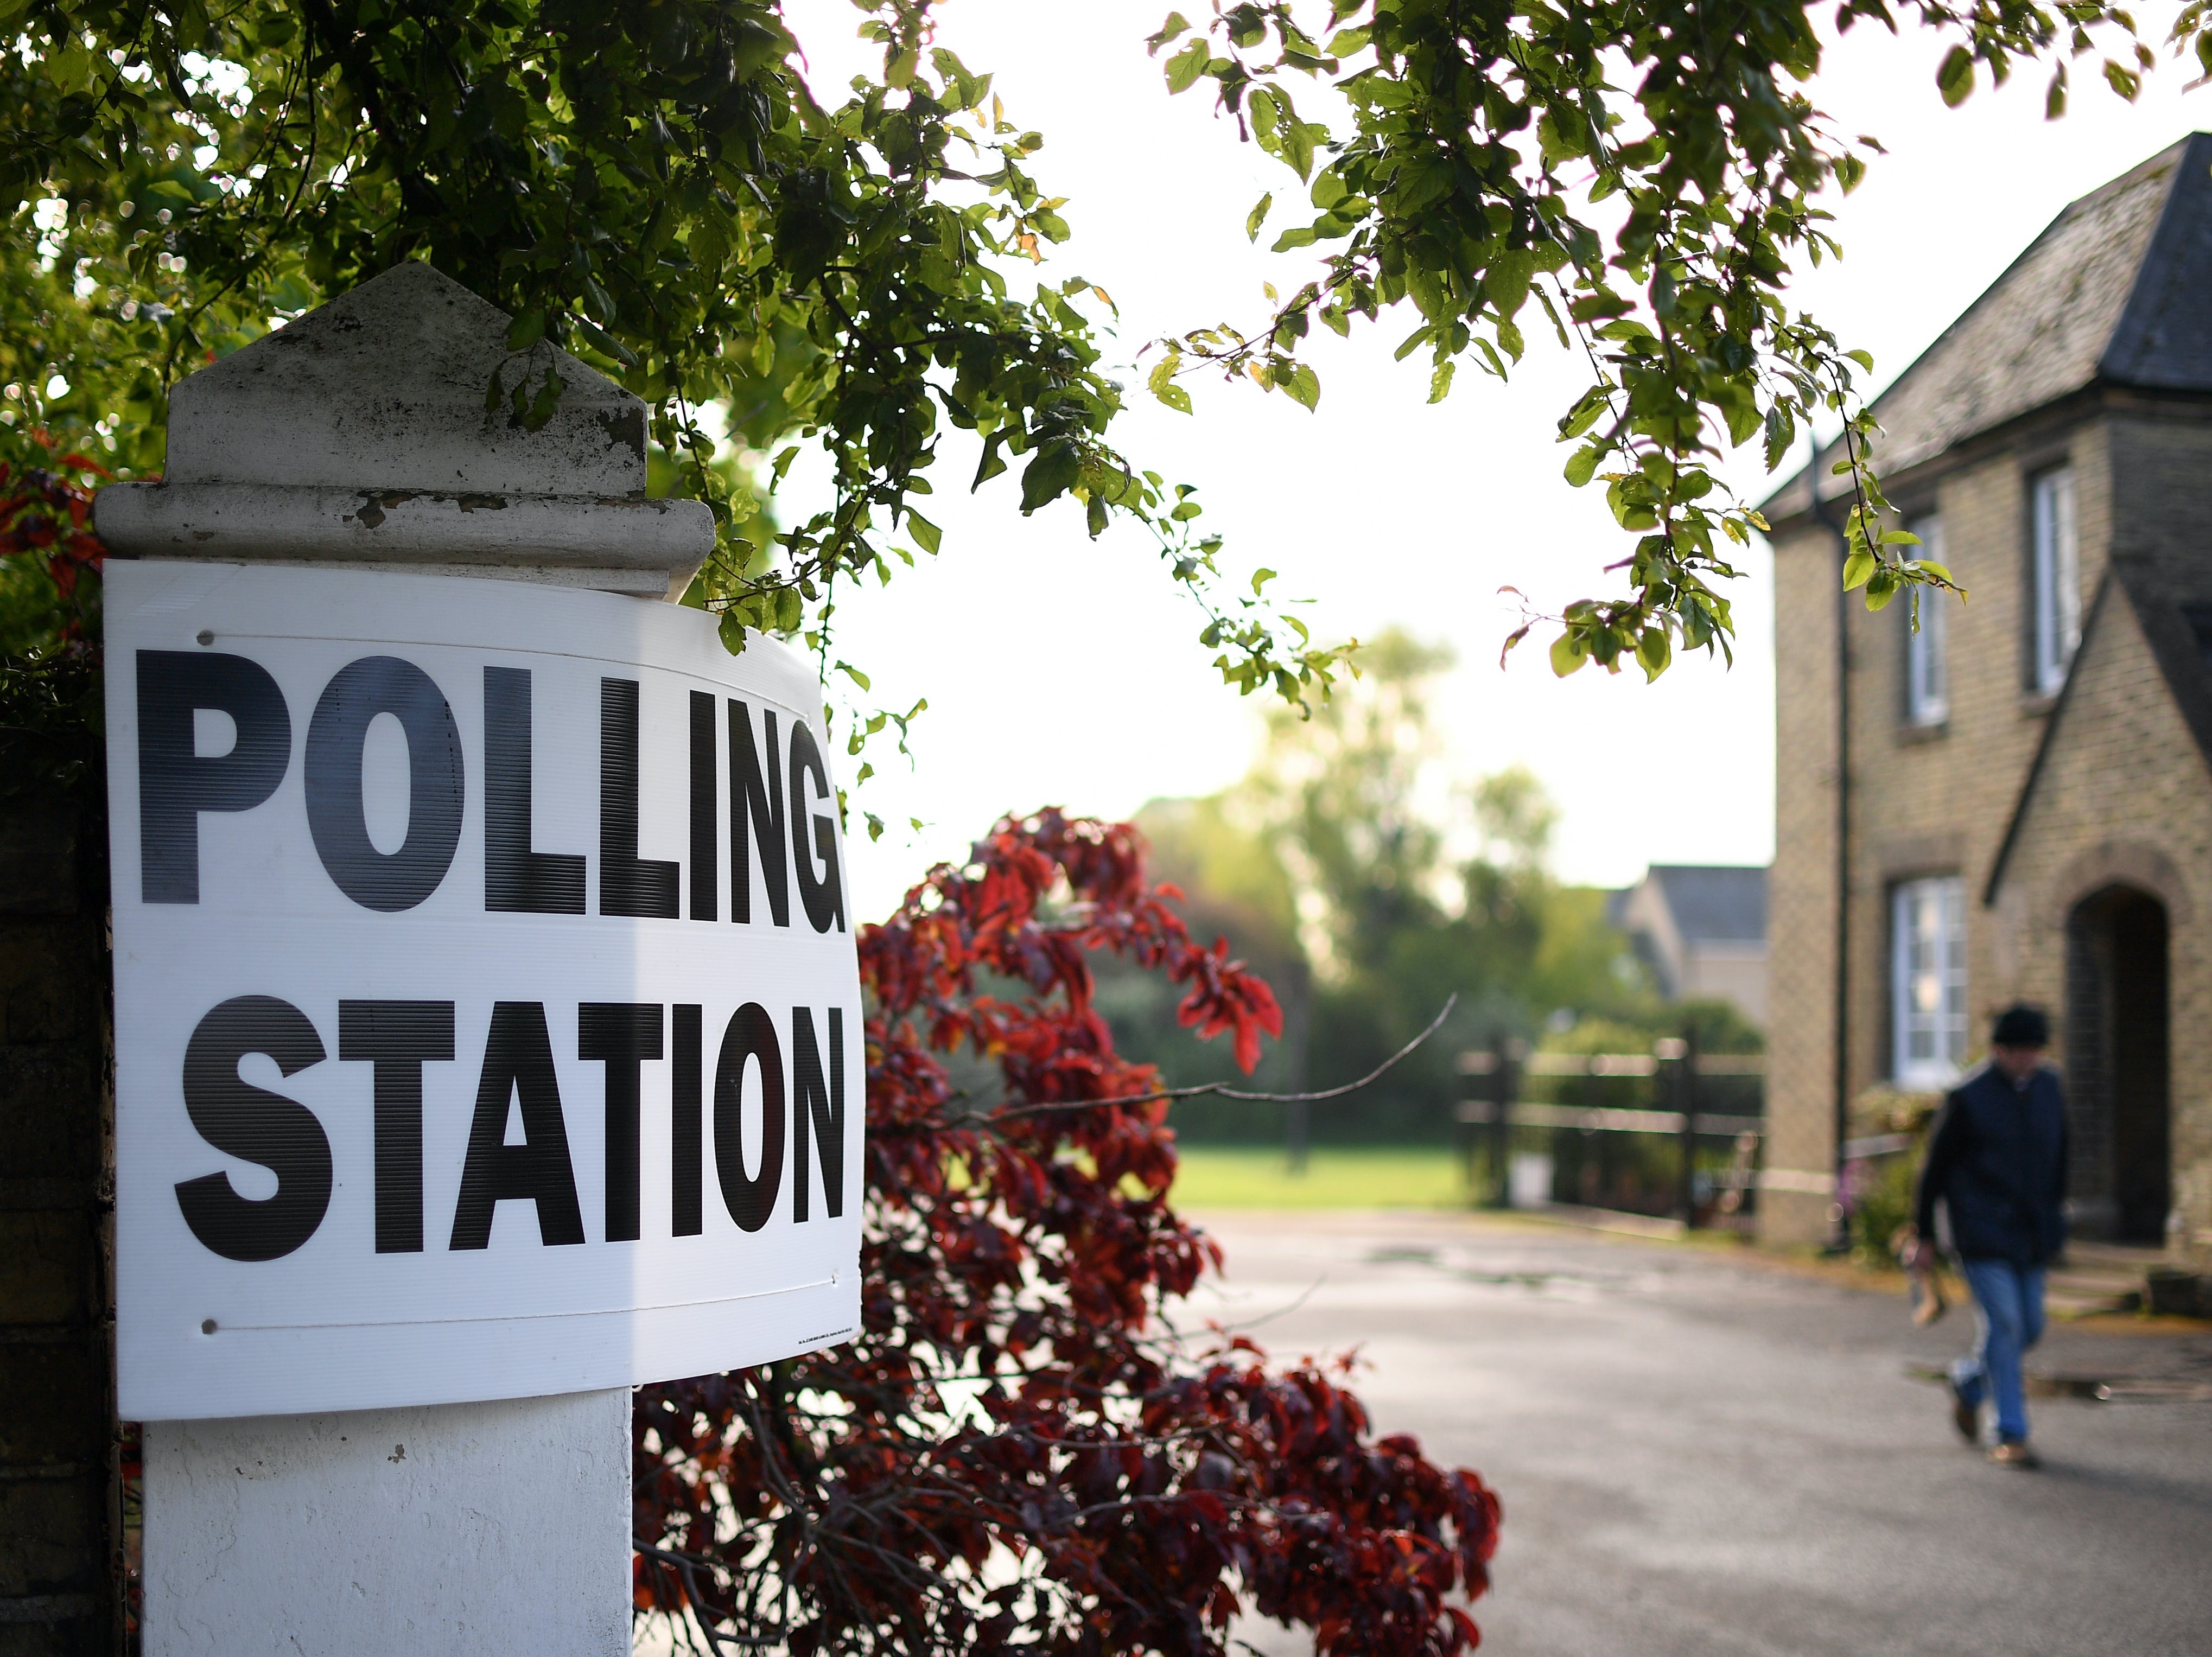 People with learning disabilities sometimes need help casting their vote at polling stations